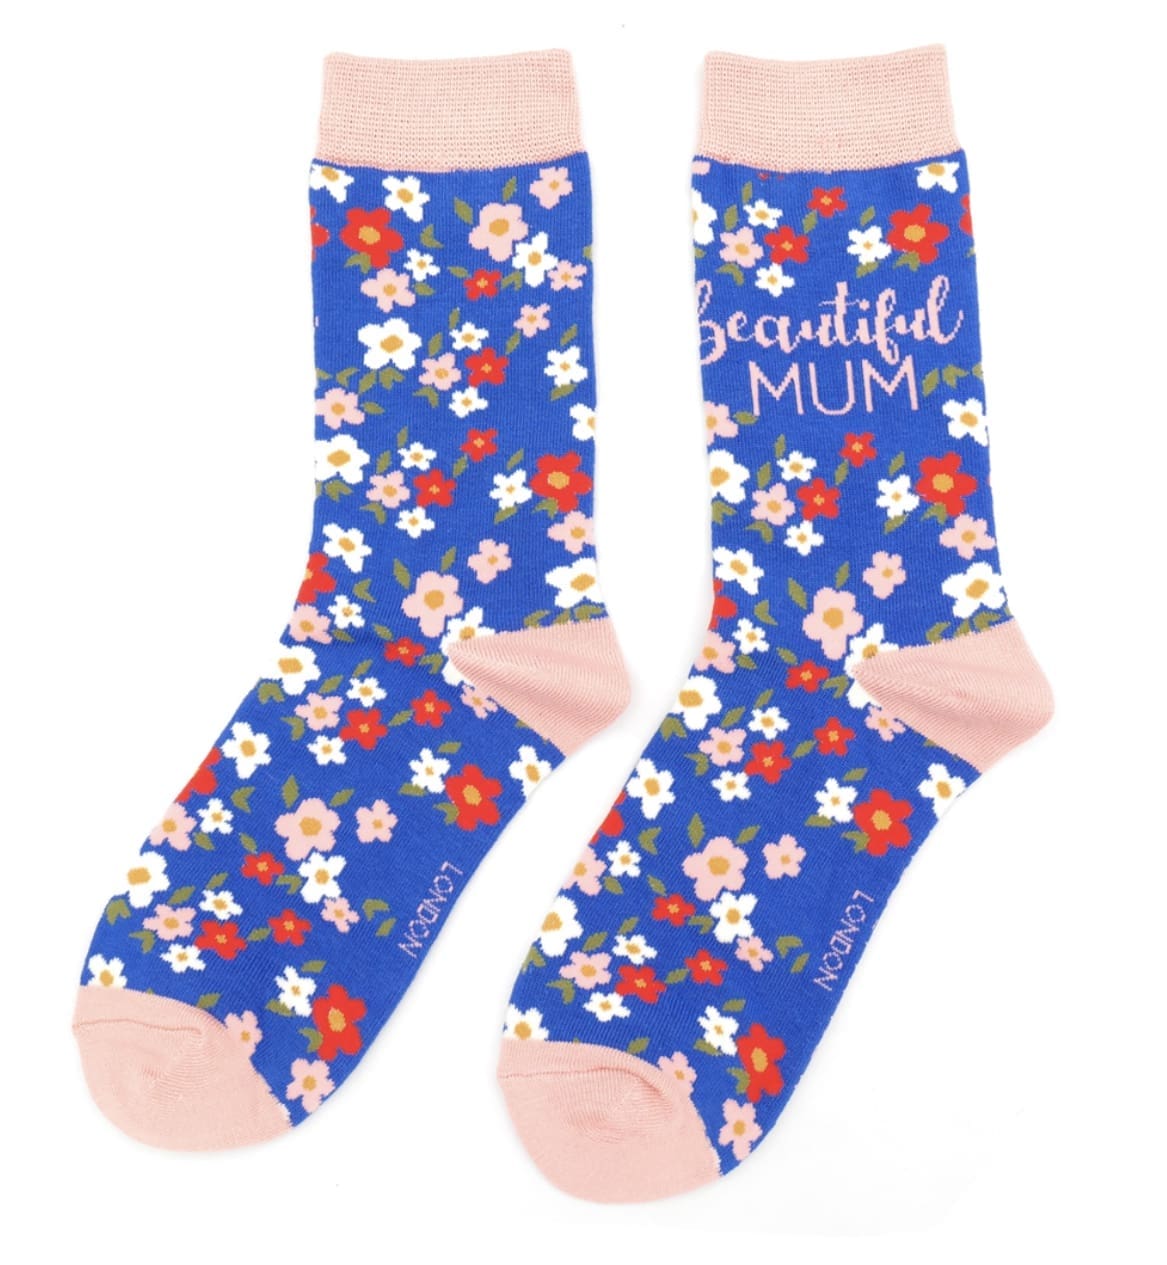 A pair of blue floral socks with the words'beautiful mum'on them.